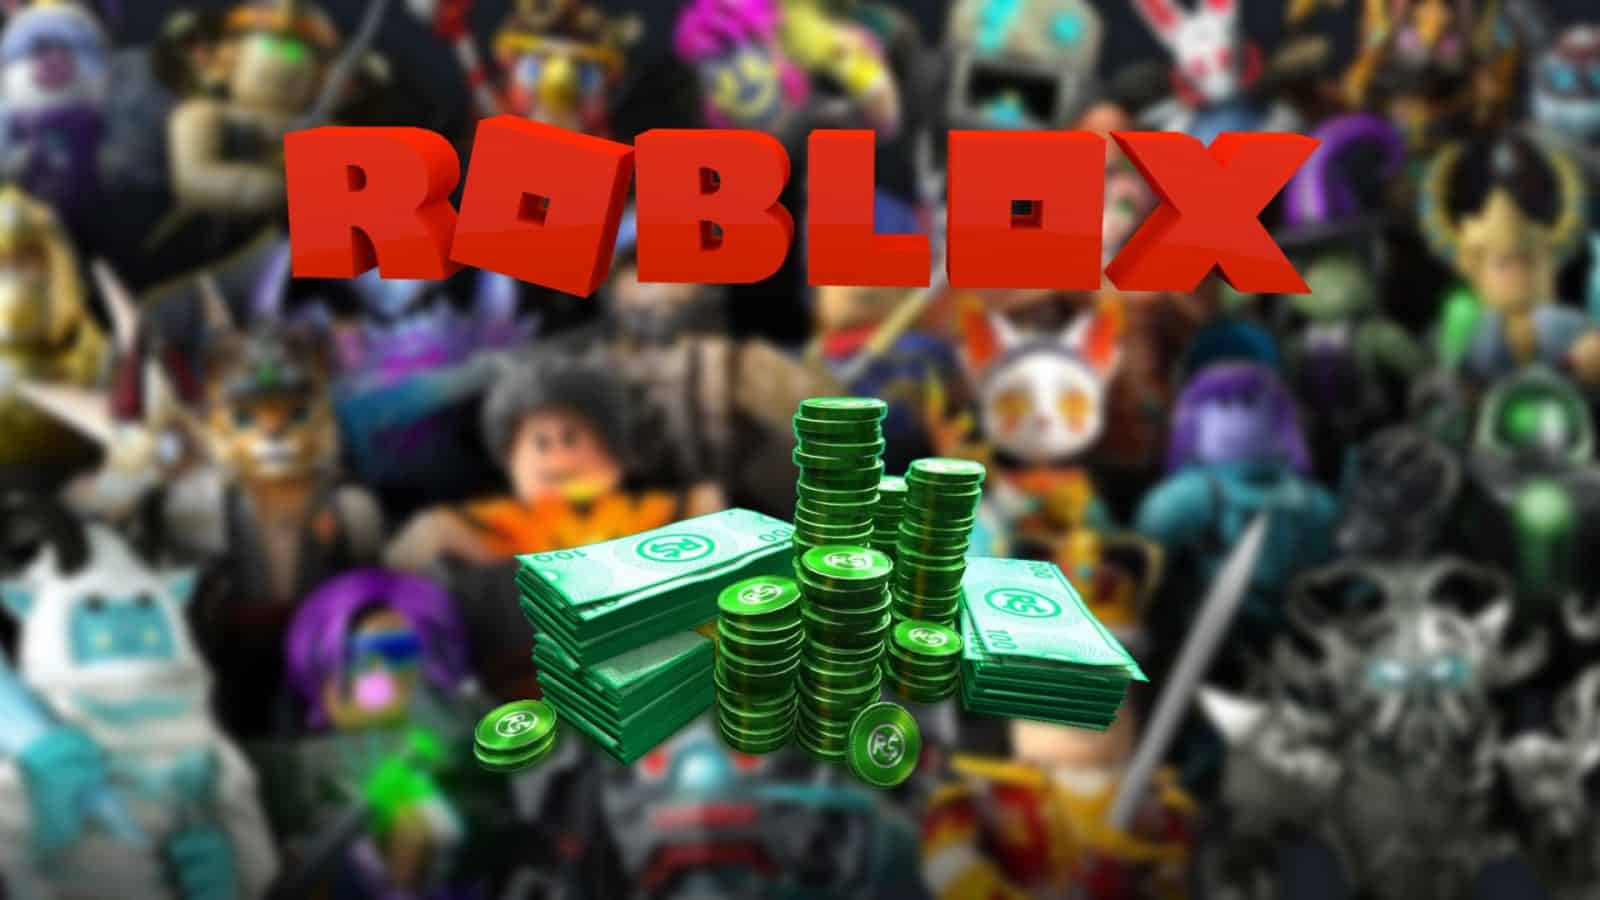 Roblox logo and cash